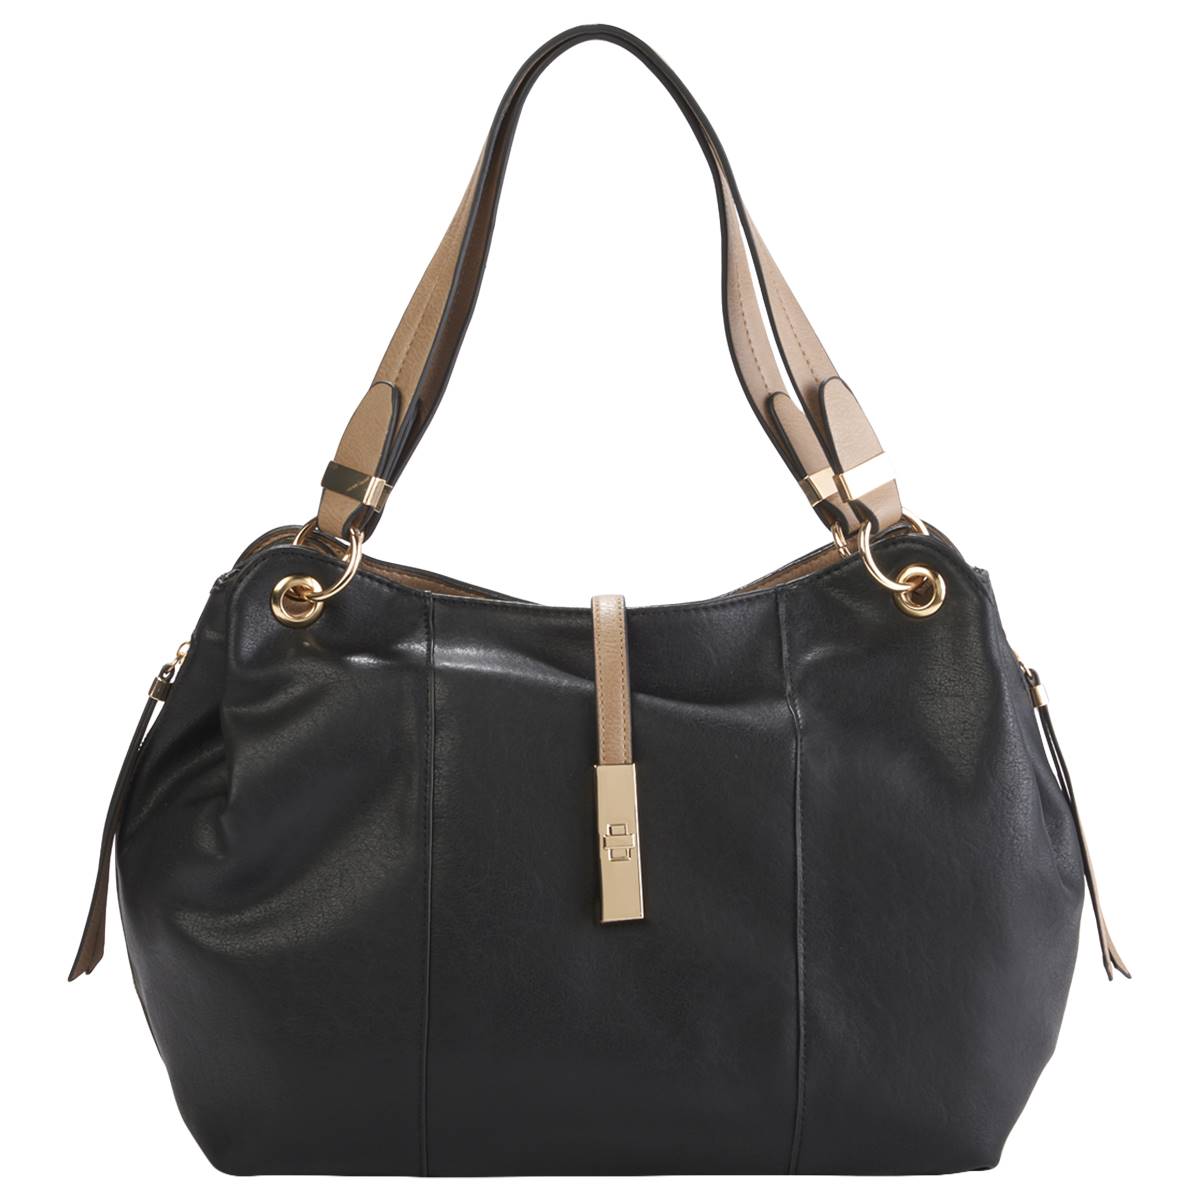 DS Fashion NY Slouchy Tote